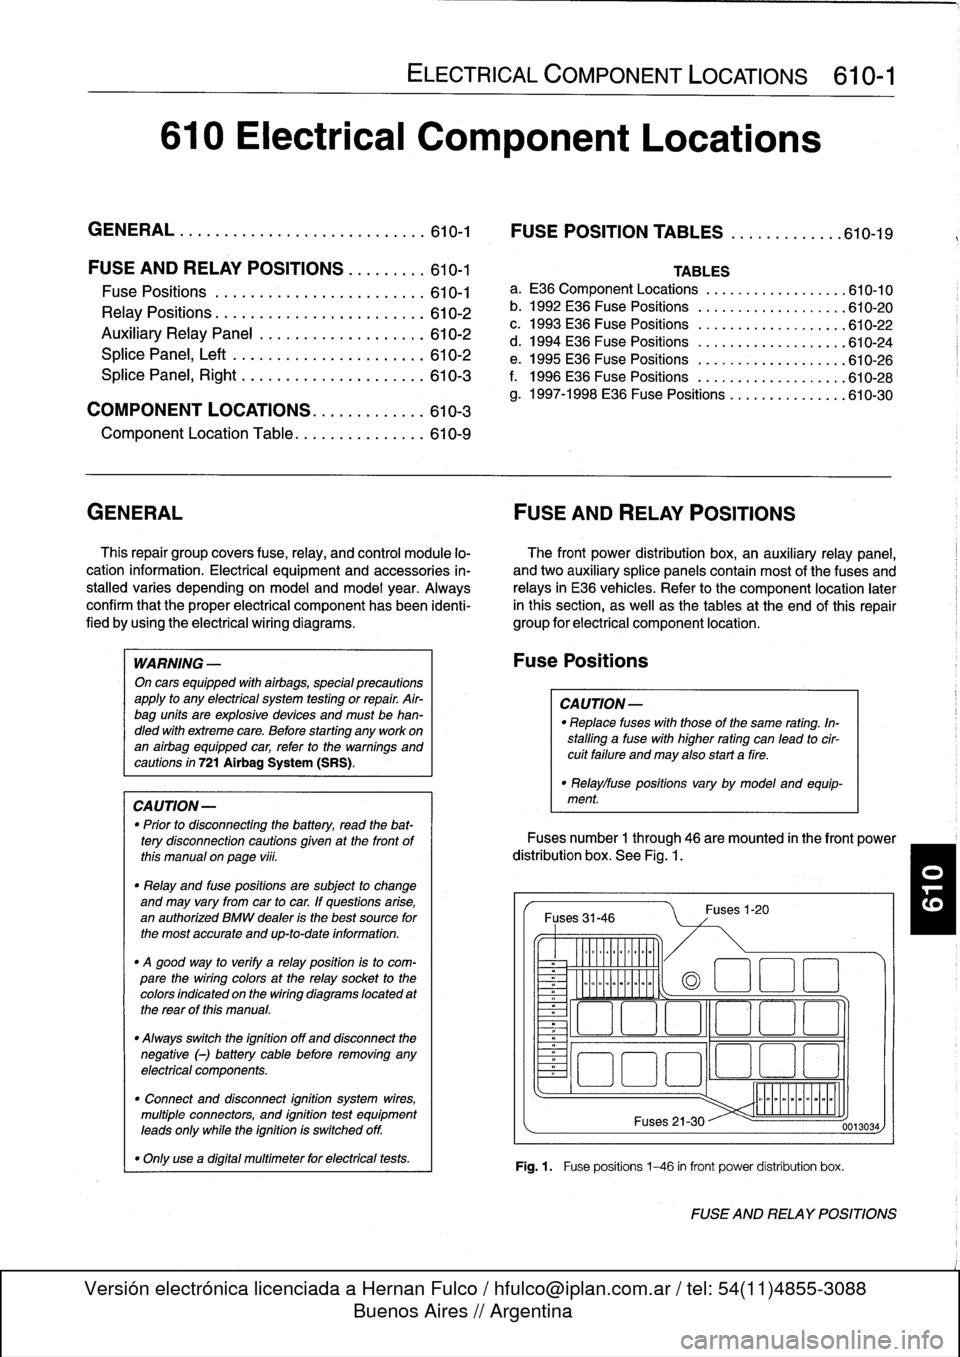 BMW 318i 1997 E36 Workshop Manual 
610
Electrical
Component
Locations

GENERAL
...........
.
.
.
.
.
.
.
.
.
........
610-1

	

FOSE
POSITION
TABLES
..
.
.
.
.
.
.....
.
610-19

FUSE
AND
RELAY
POSITIONS
.
...
.
.
.
.
.
610-1

Fuse
Pos